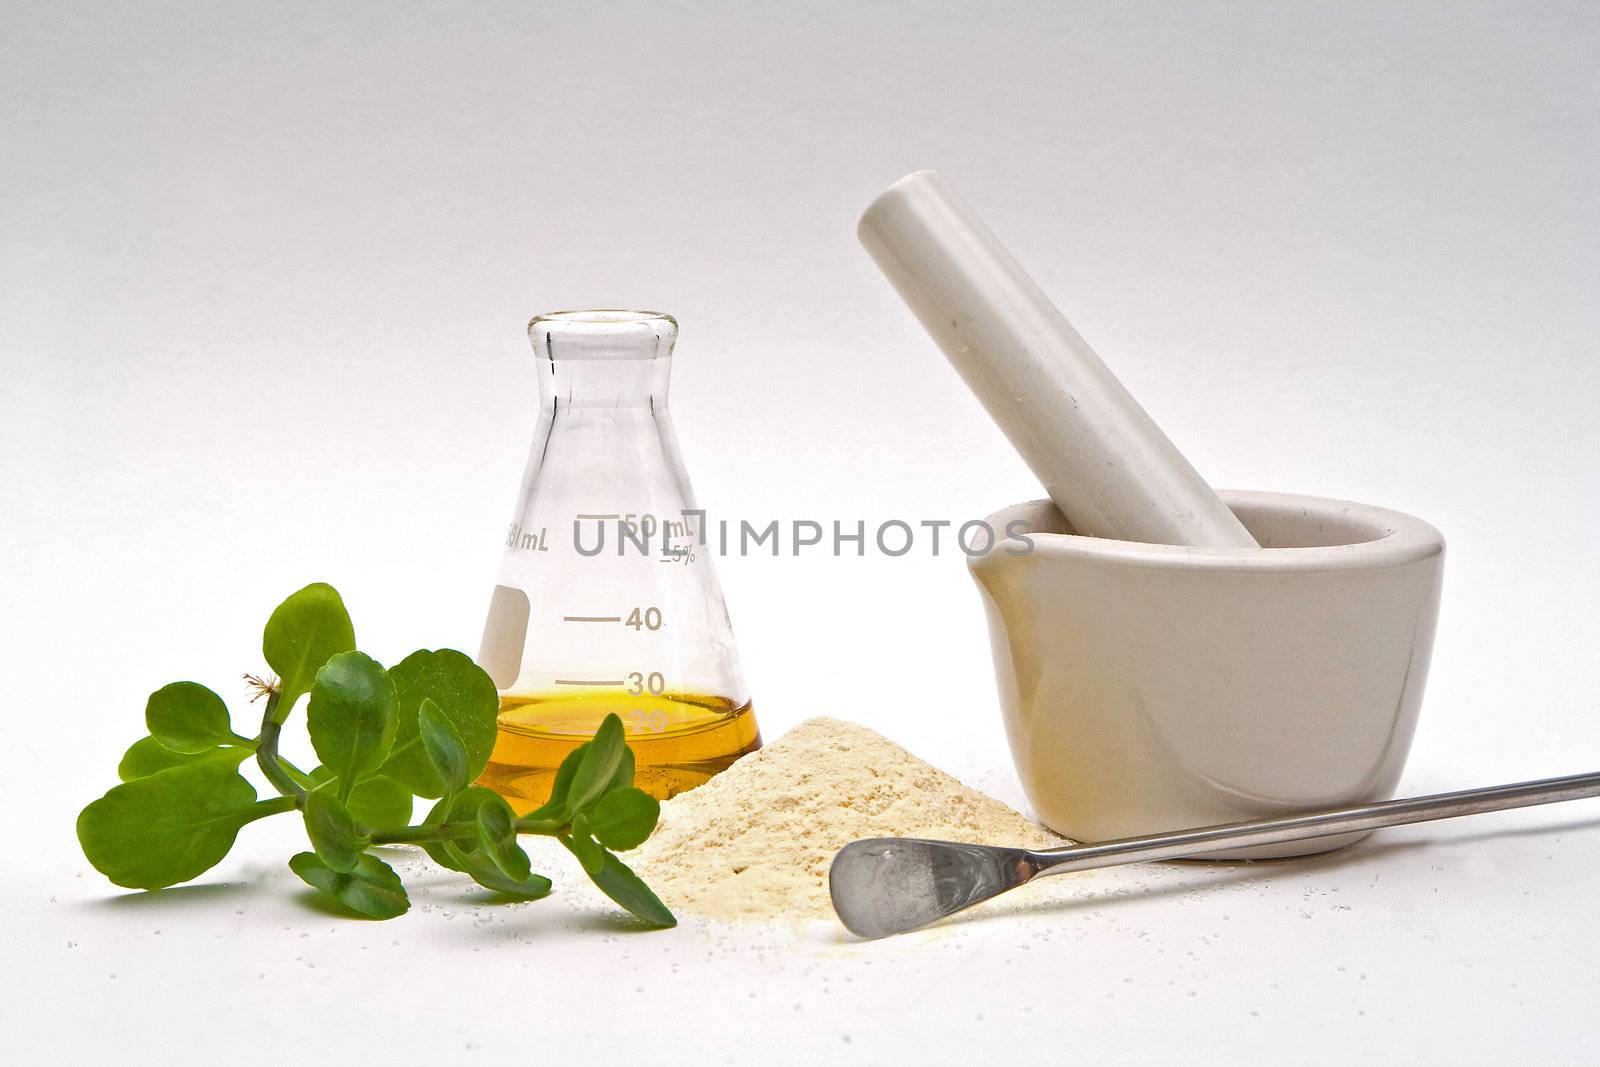 A yellow liquid in a flask with a powder and some leaves in front with a white mortar and a silver spatula on a white background